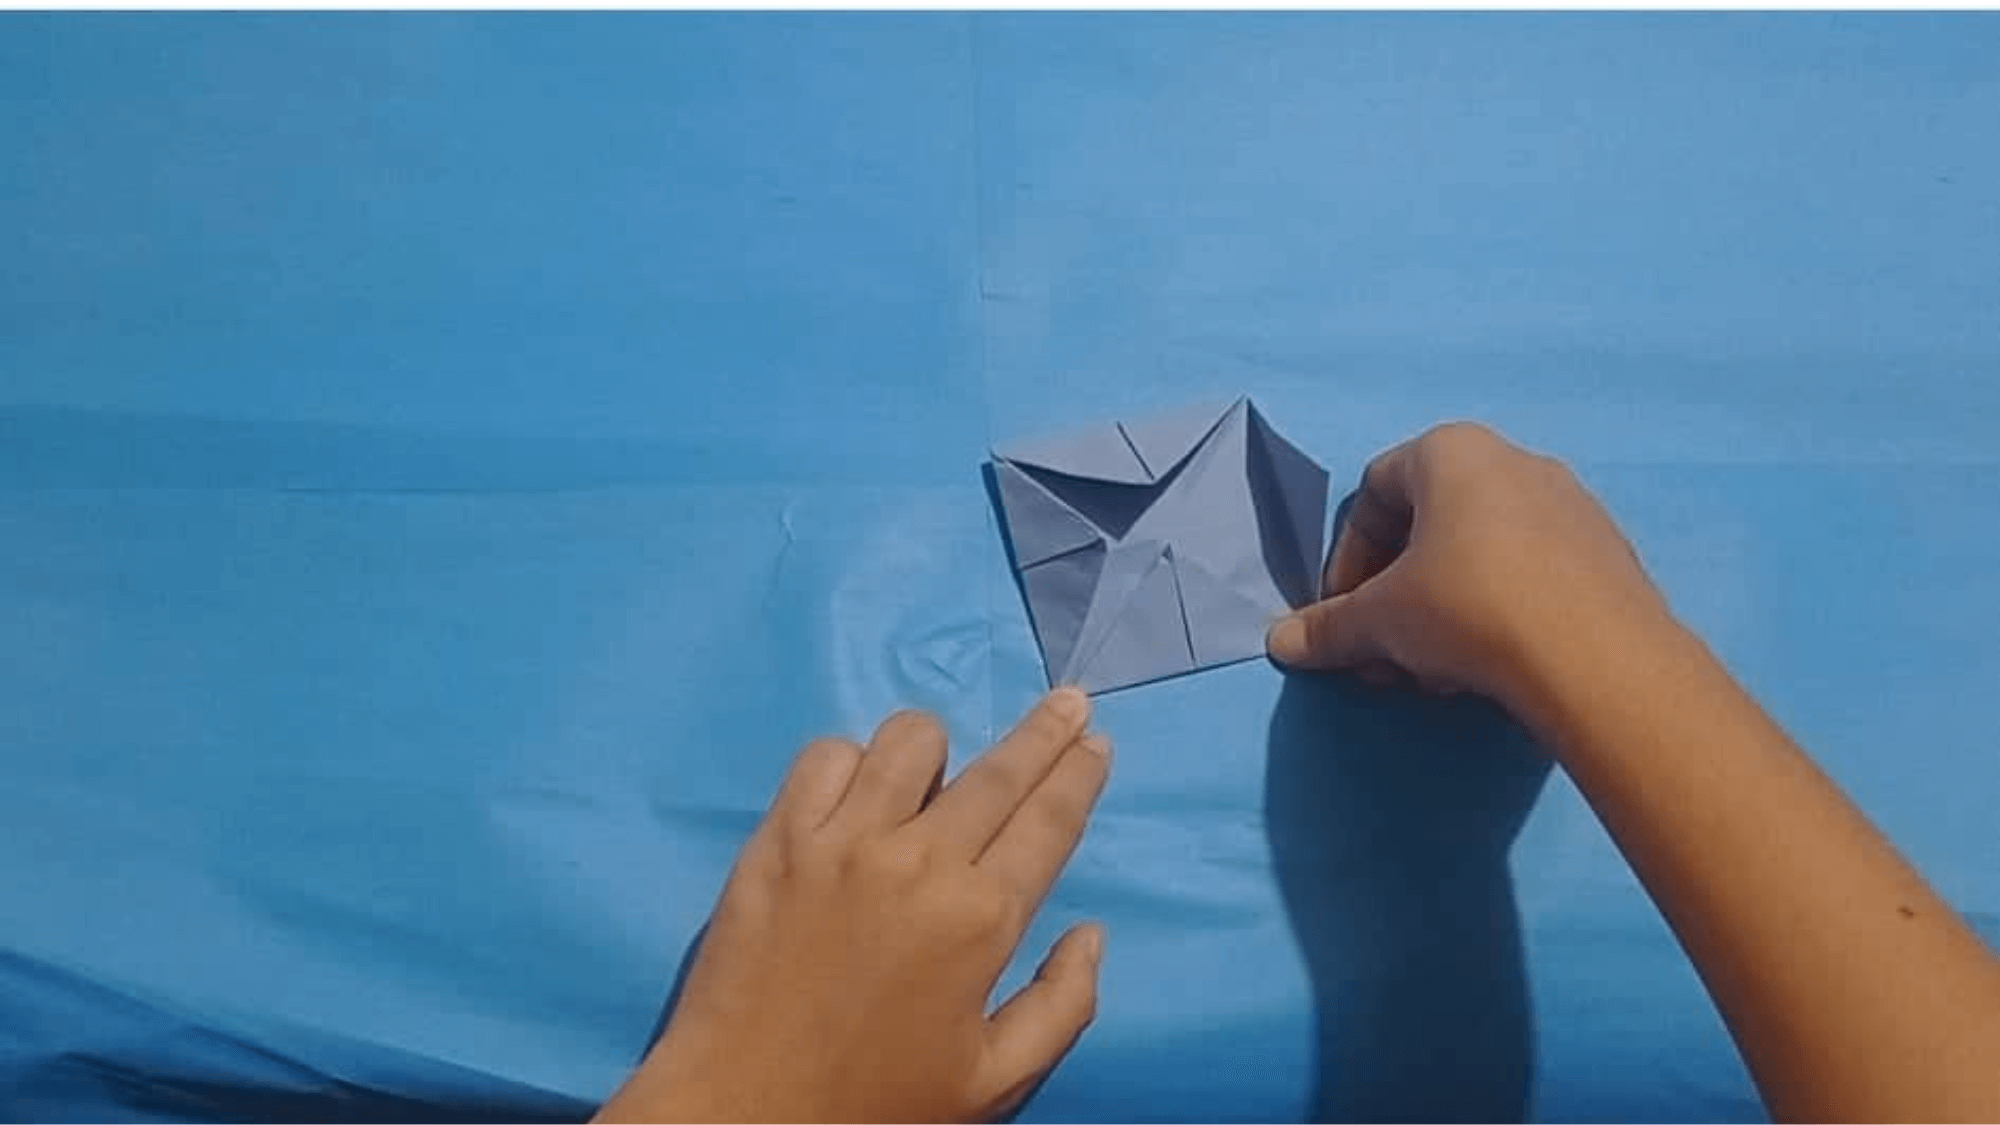 Origami Lotus Flower Instructions - Learn Origami | Origami Instructions